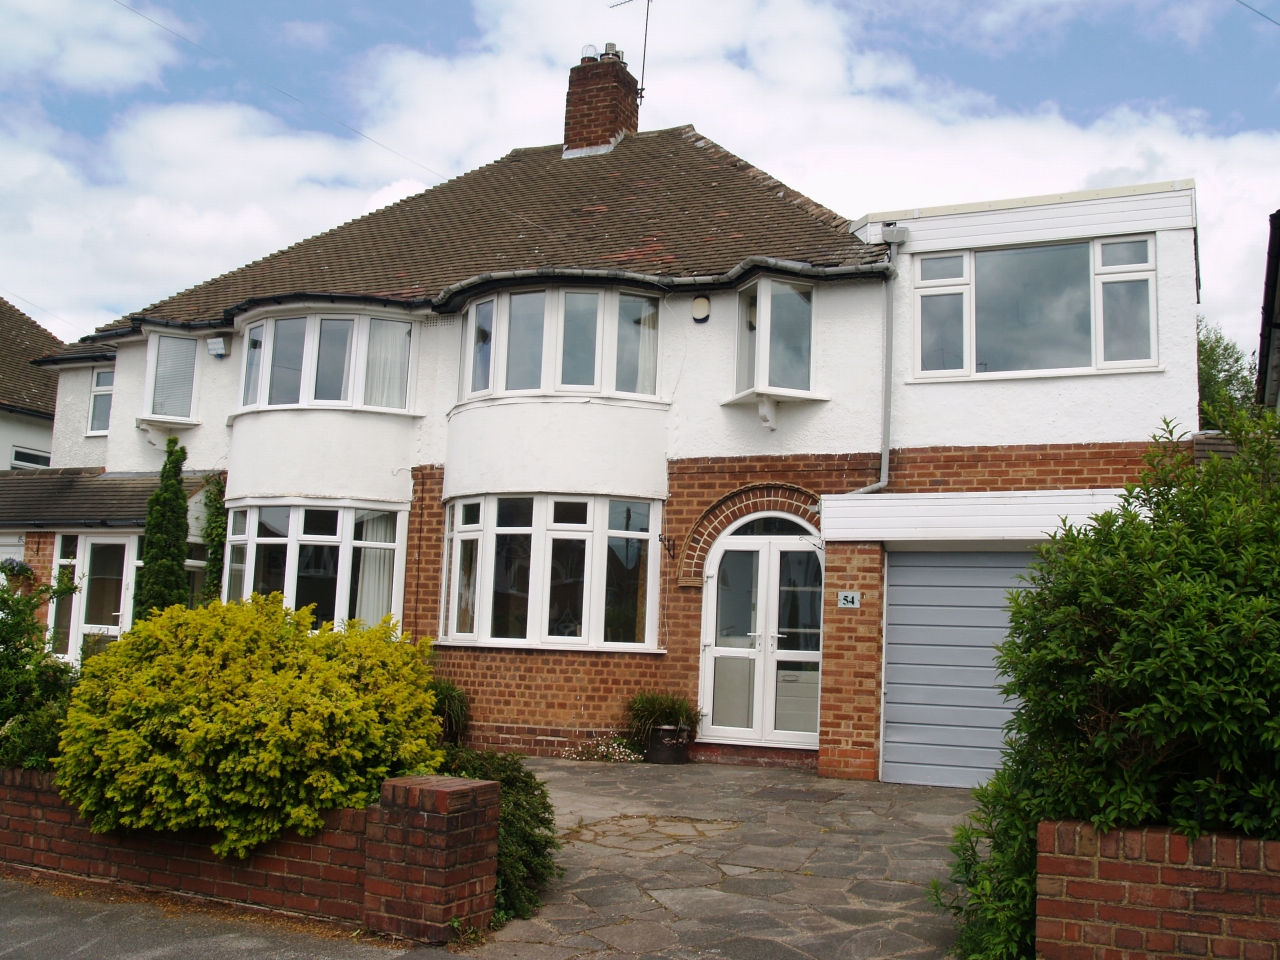 3 bedroom semi detached house Application Made in Solihull - photograph 1.